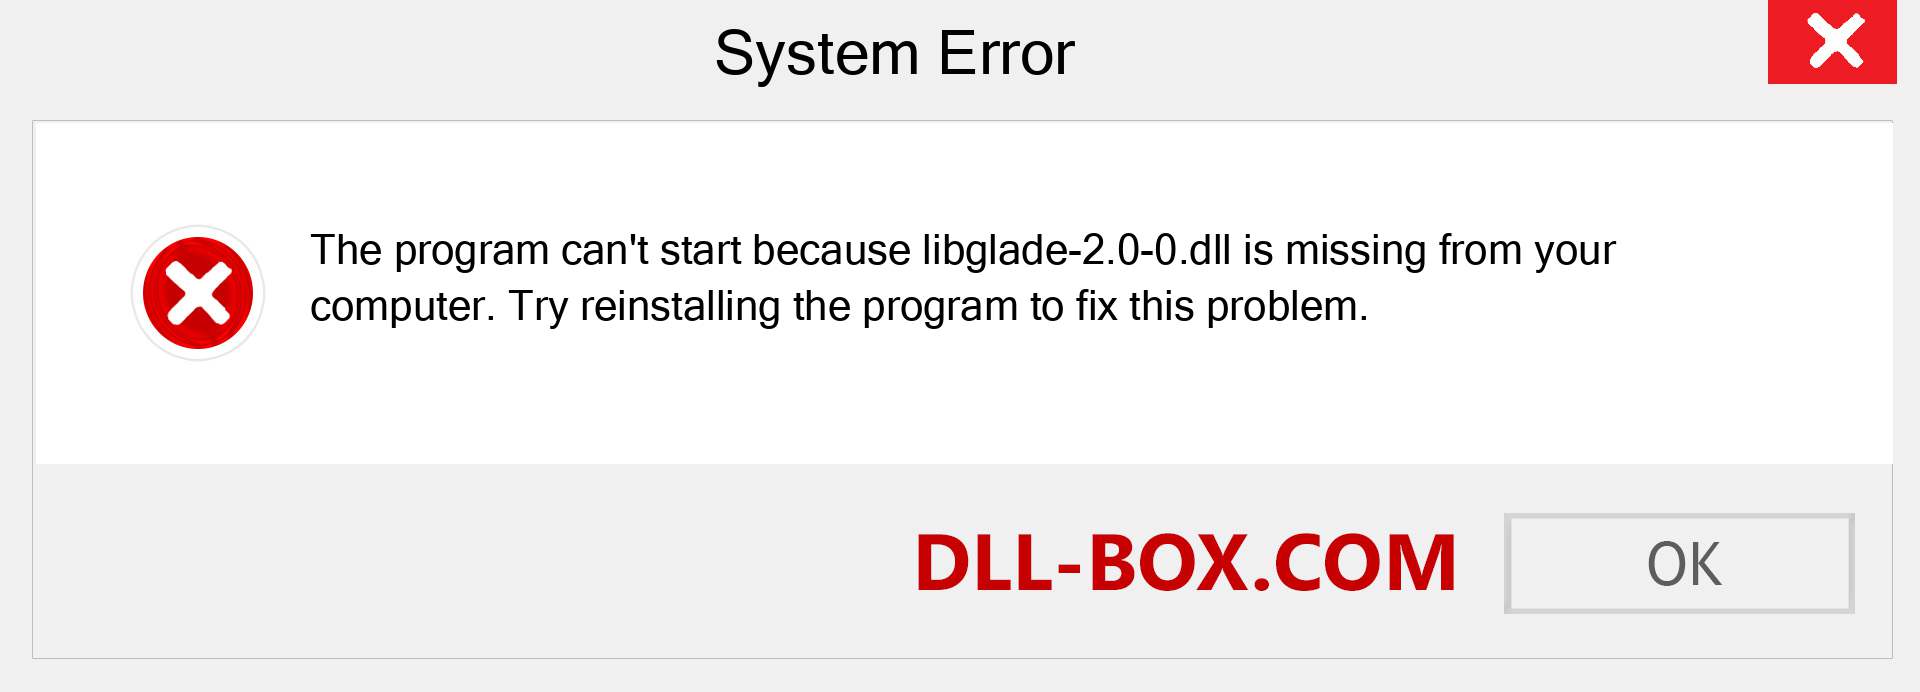  libglade-2.0-0.dll file is missing?. Download for Windows 7, 8, 10 - Fix  libglade-2.0-0 dll Missing Error on Windows, photos, images